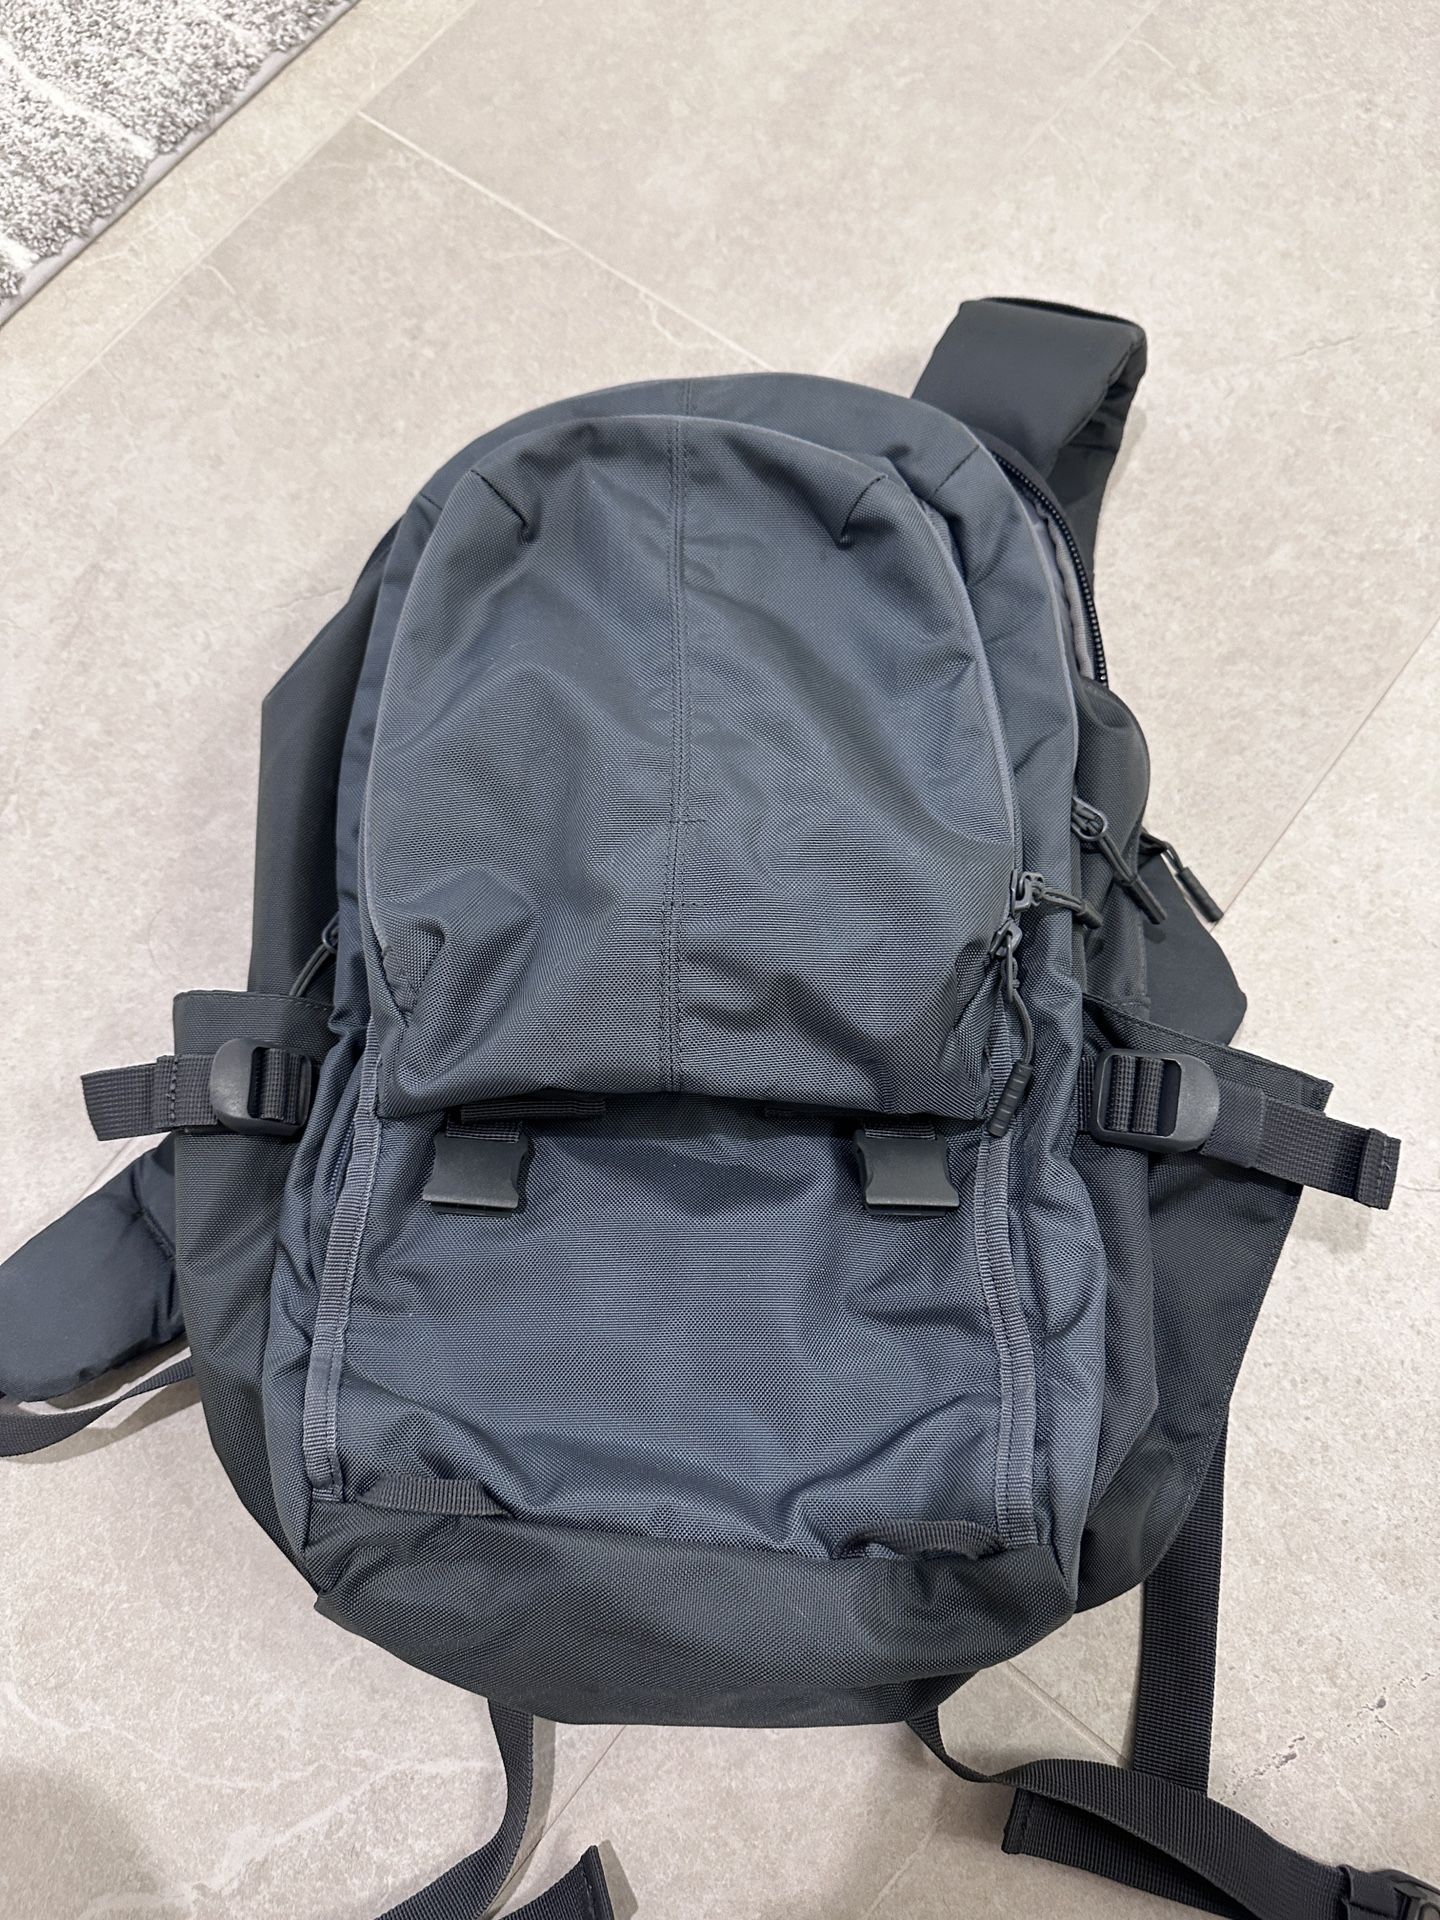 5.11 TACTICAL BACKPACK